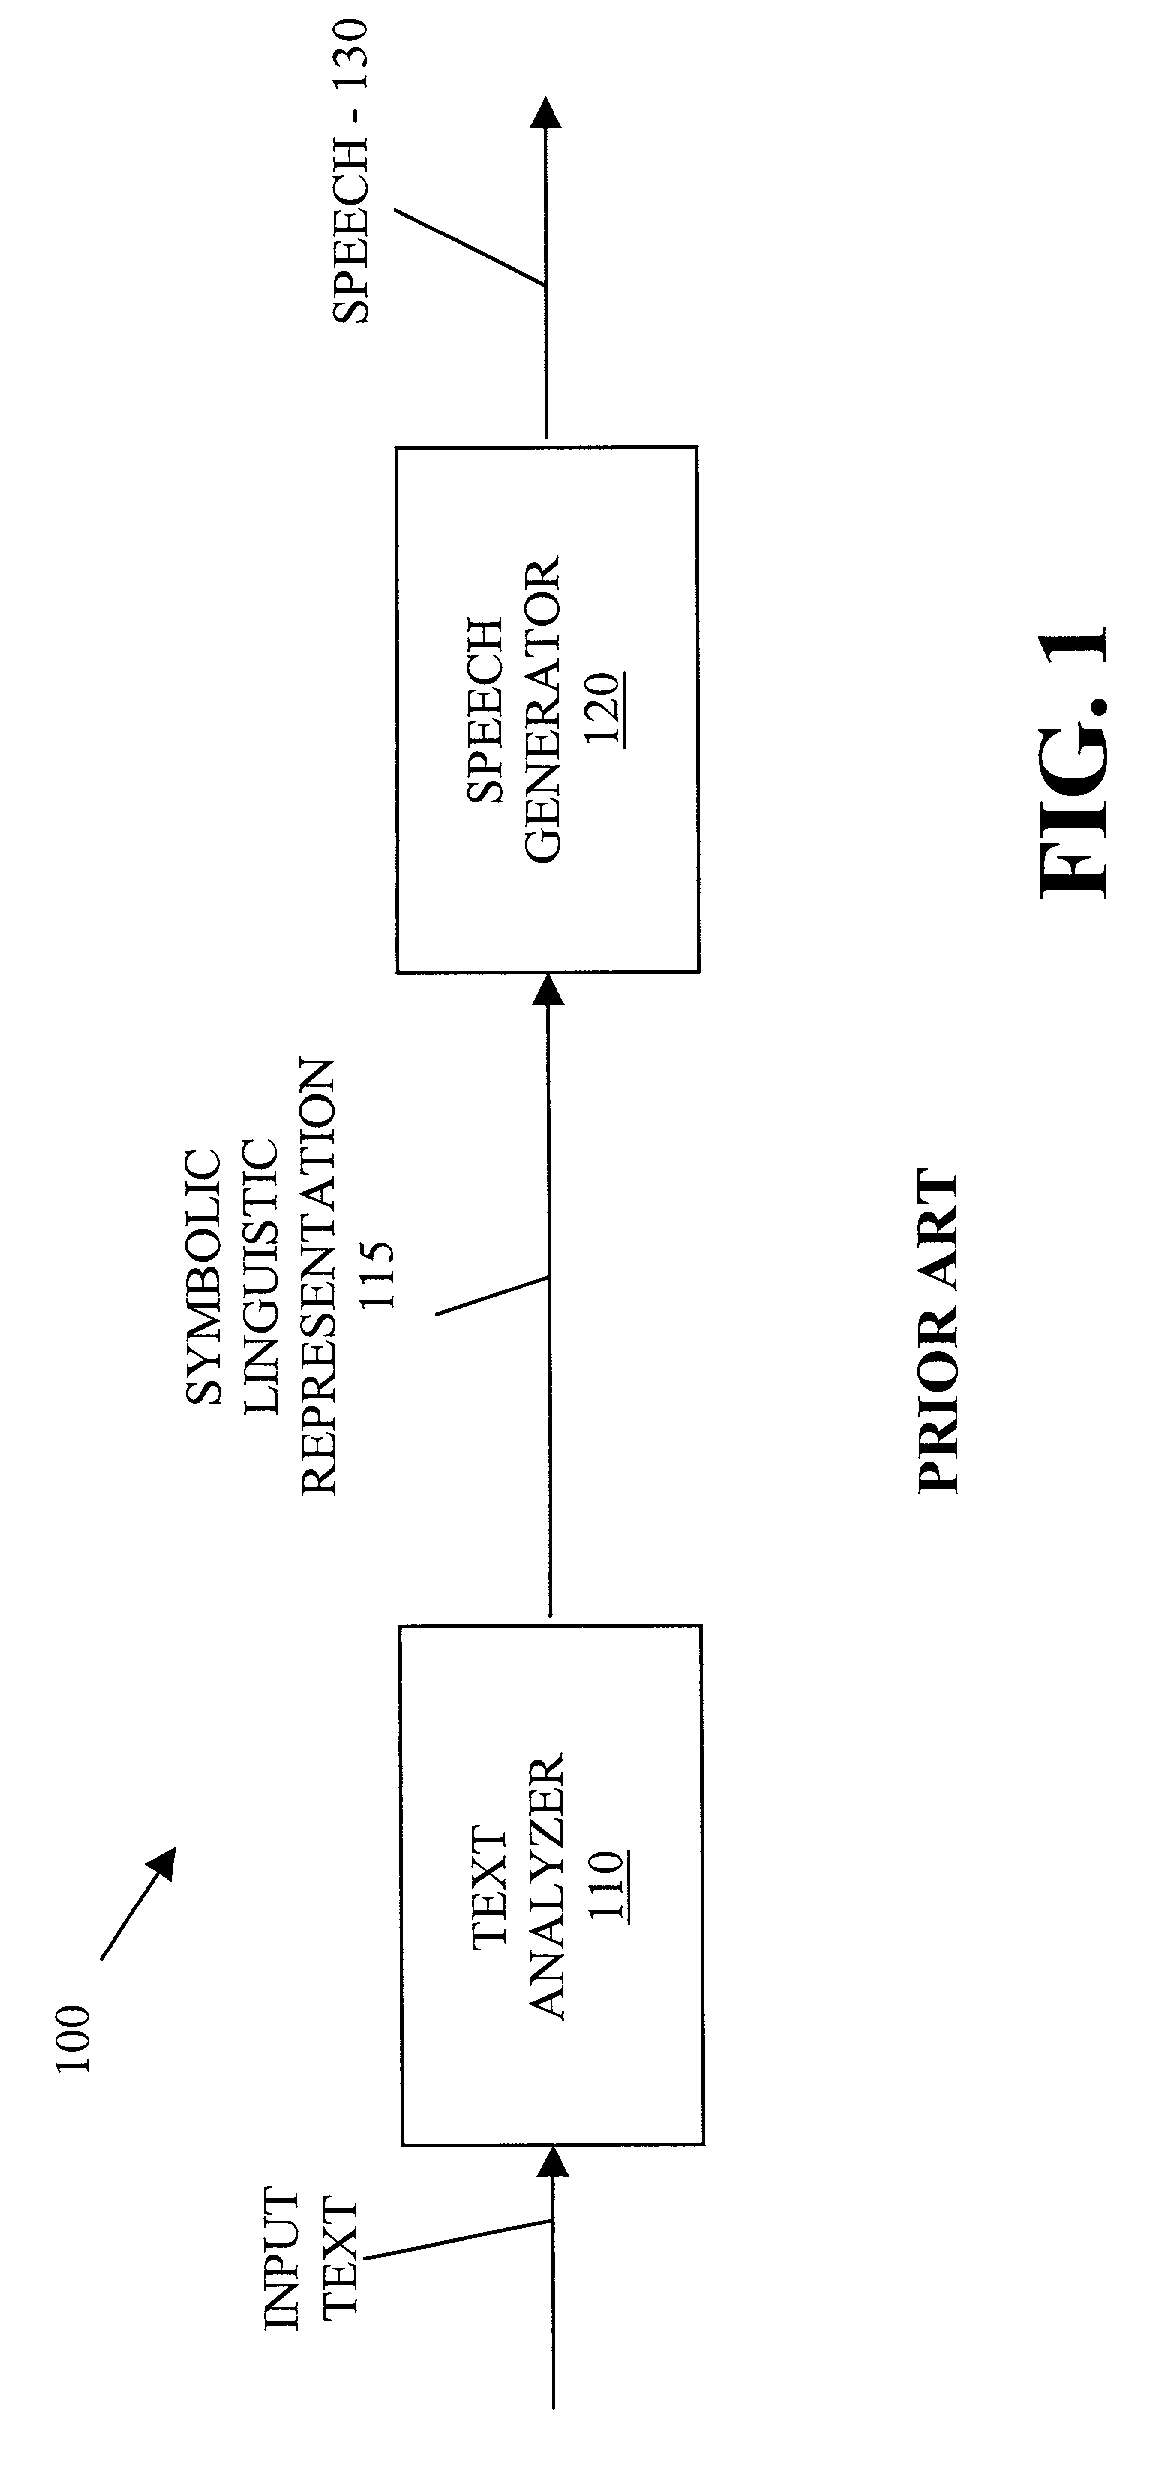 Method and apparatus for producing natural sounding pitch contours in a speech synthesizer